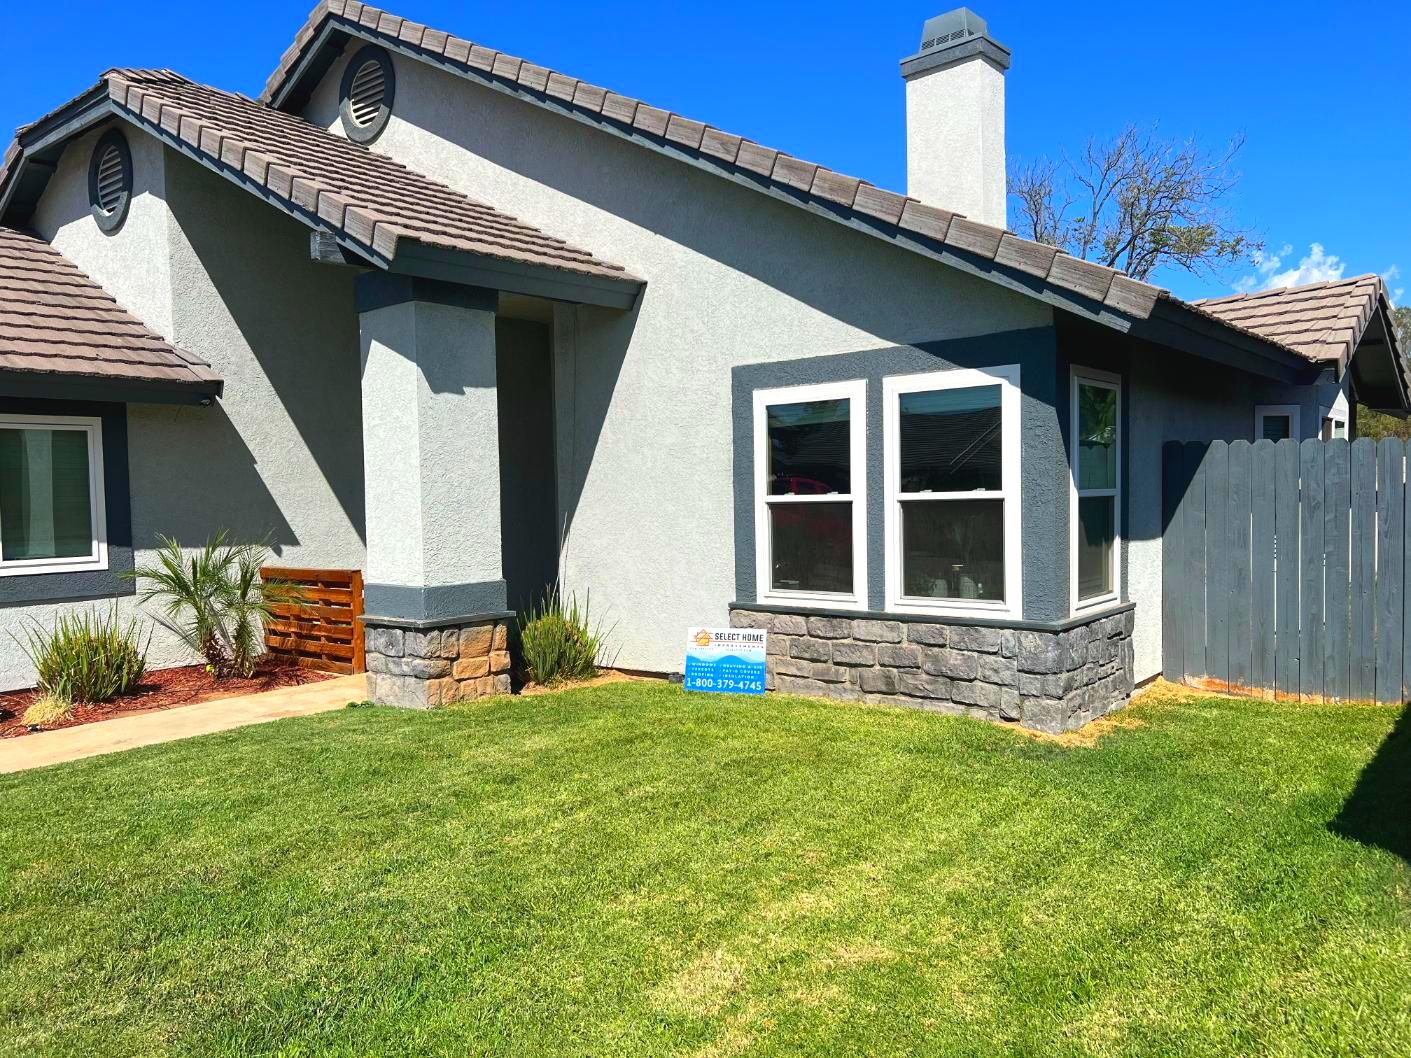 Energy Efficient Window Replacement in Calimesa, CA